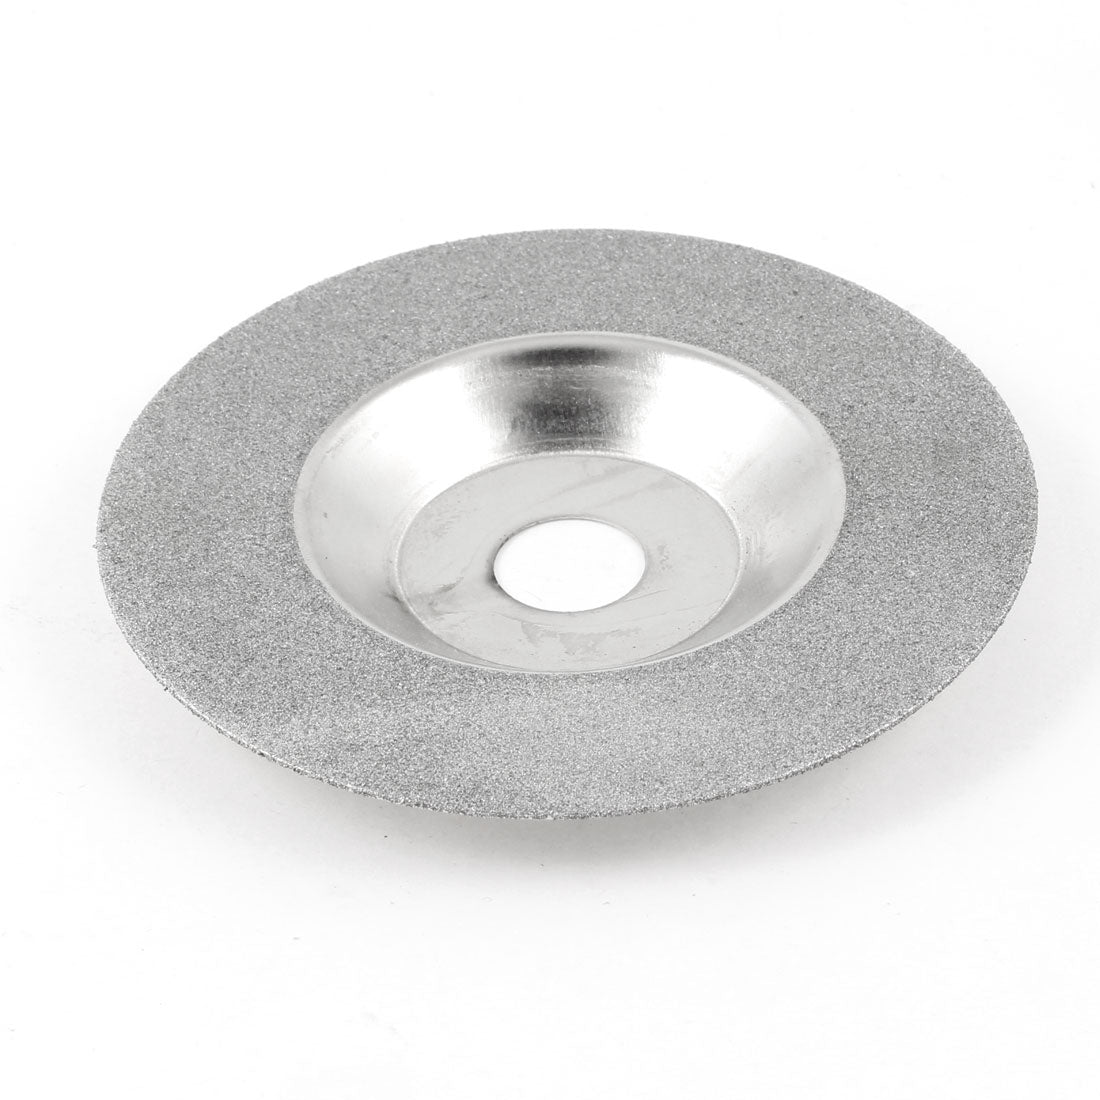 uxcell Uxcell Silver Tone 4" OD 10mm Height Diamond Grinding Wheel Cutter